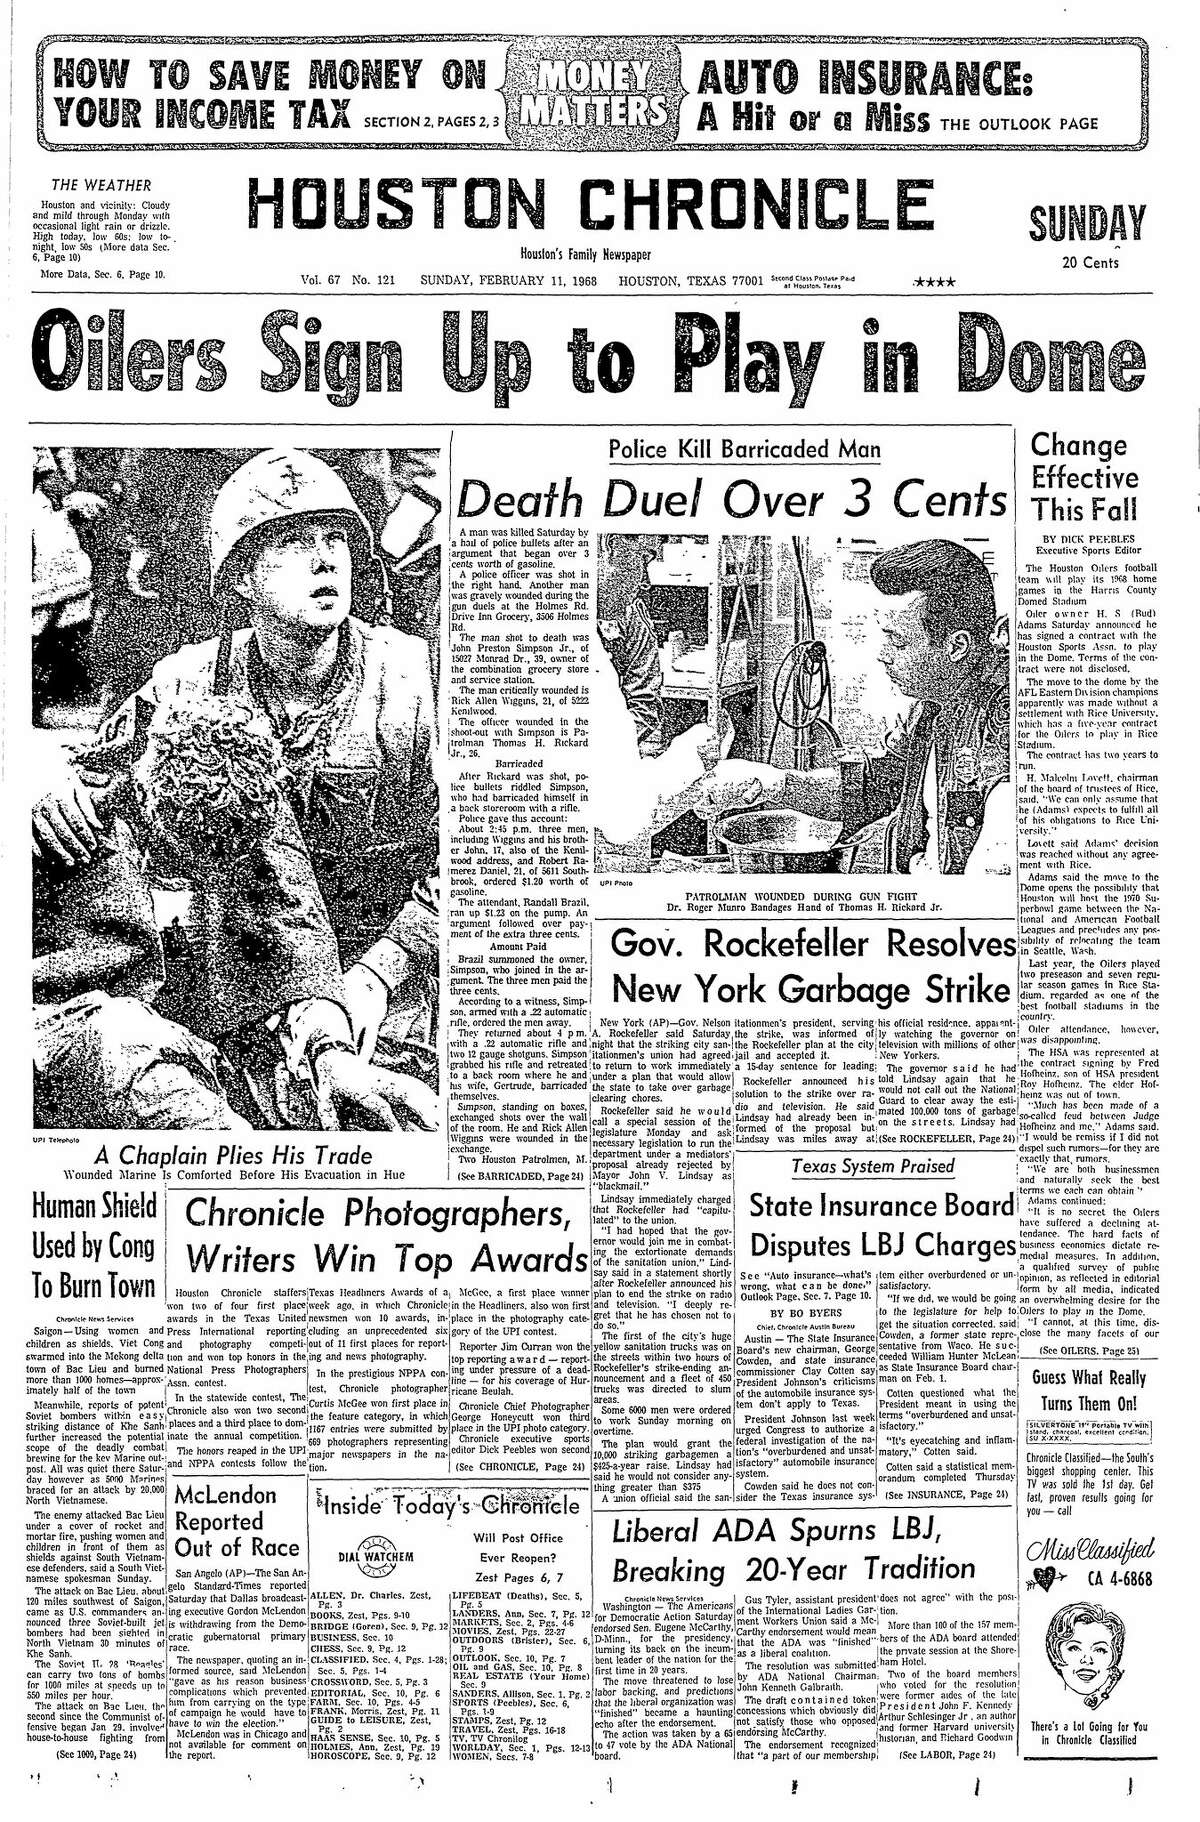 Houston Chronicle front page for Feb. 11, 1968.